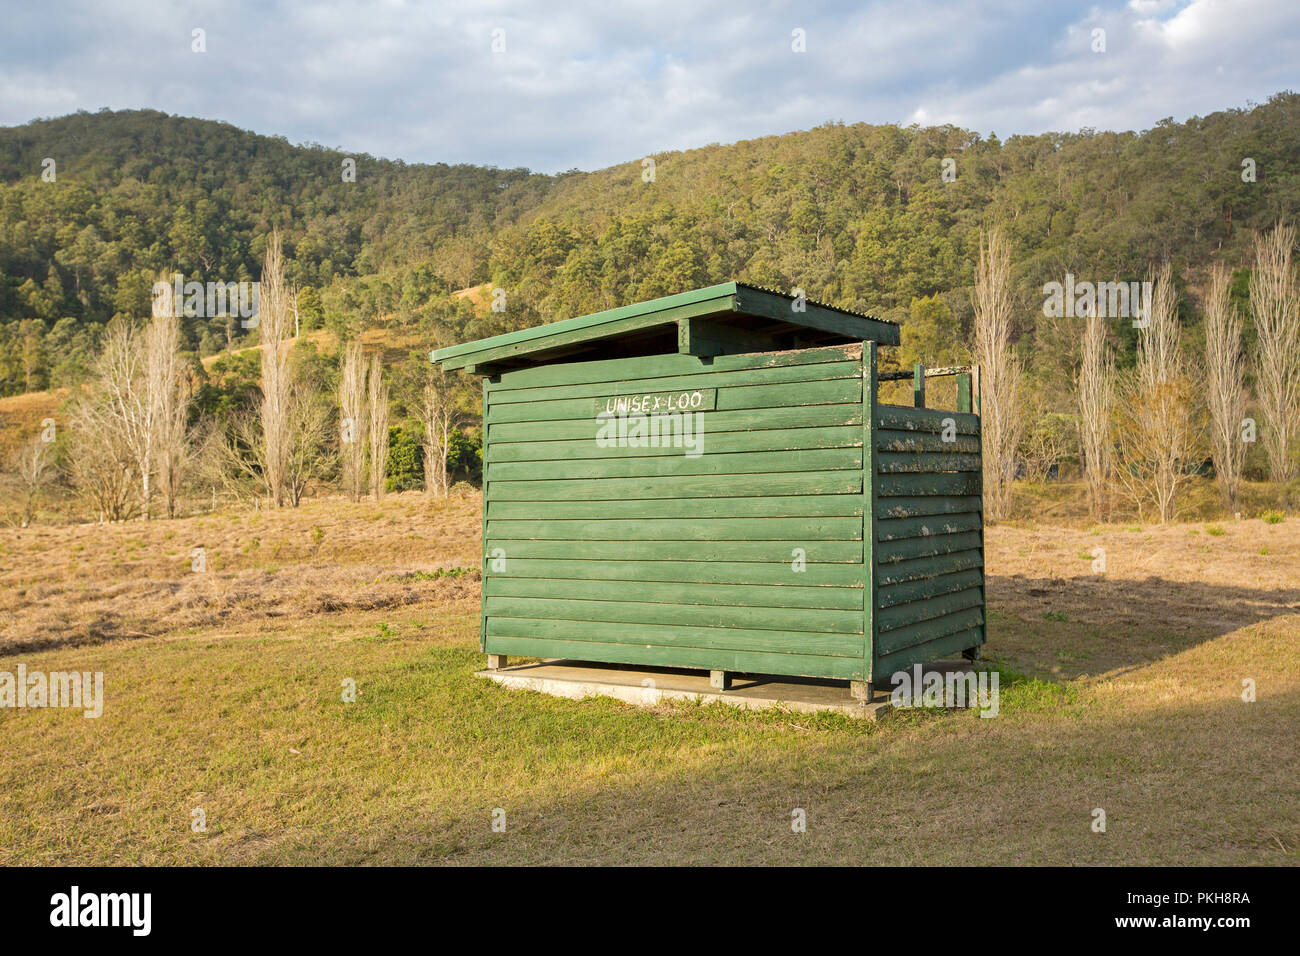 Wooden building housing pit toilet in field adjacent to forested hills at rural camping area in NSW Australia NSW Stock Photo